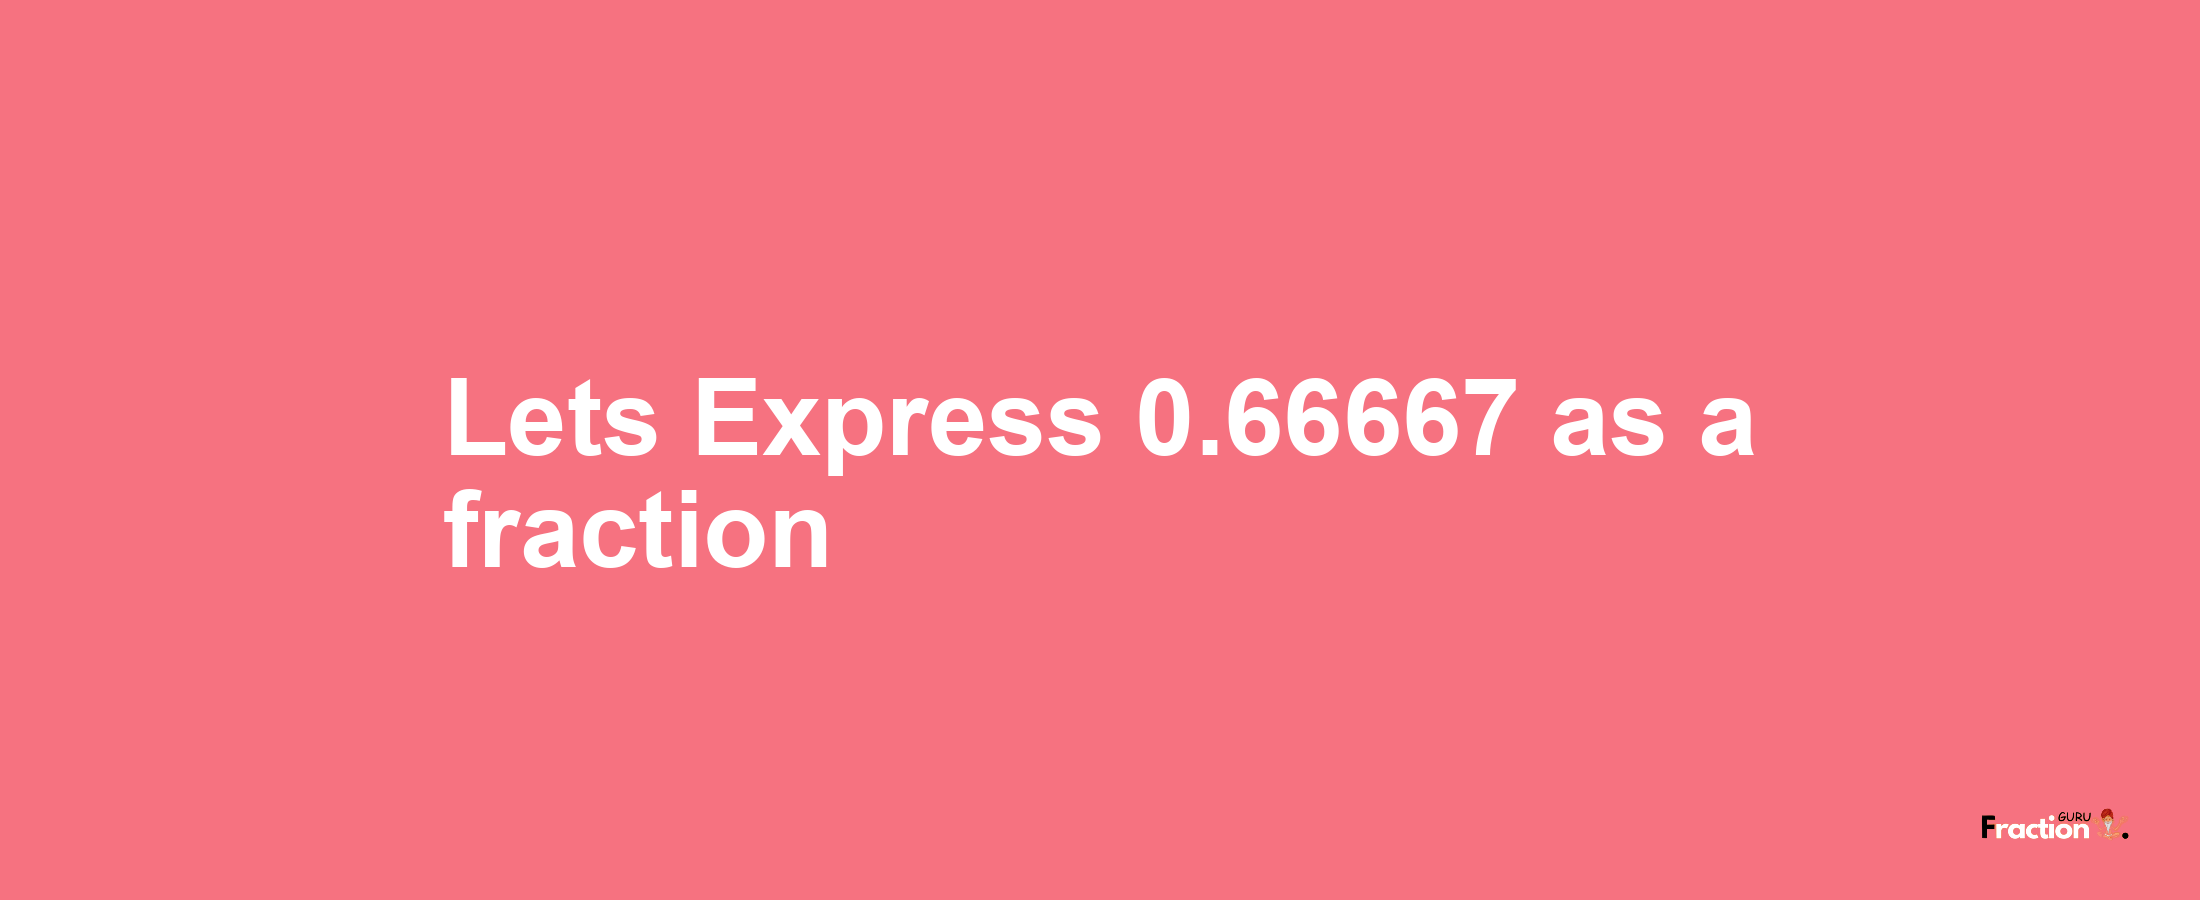 Lets Express 0.66667 as afraction